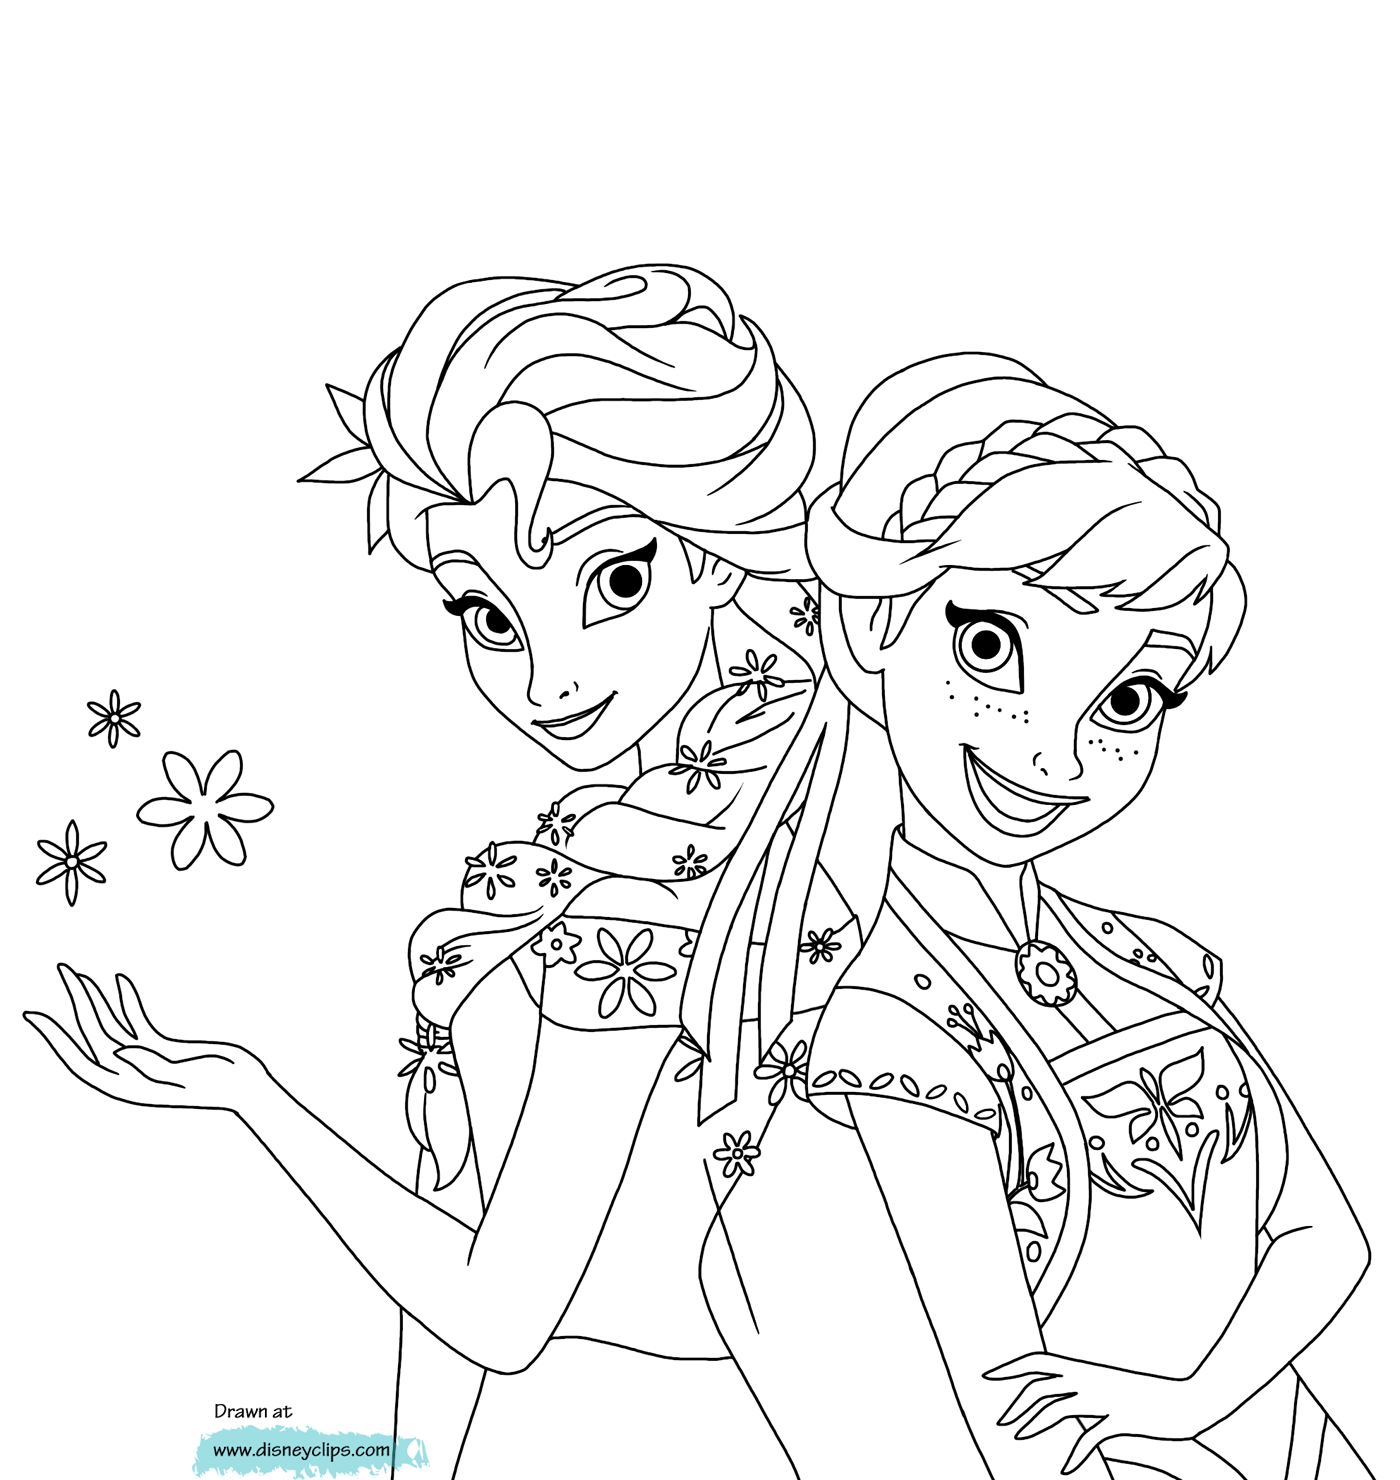 anna and elsa pictures to color anna and elsa in frozen fever coloring page frozen elsa color to pictures and anna 